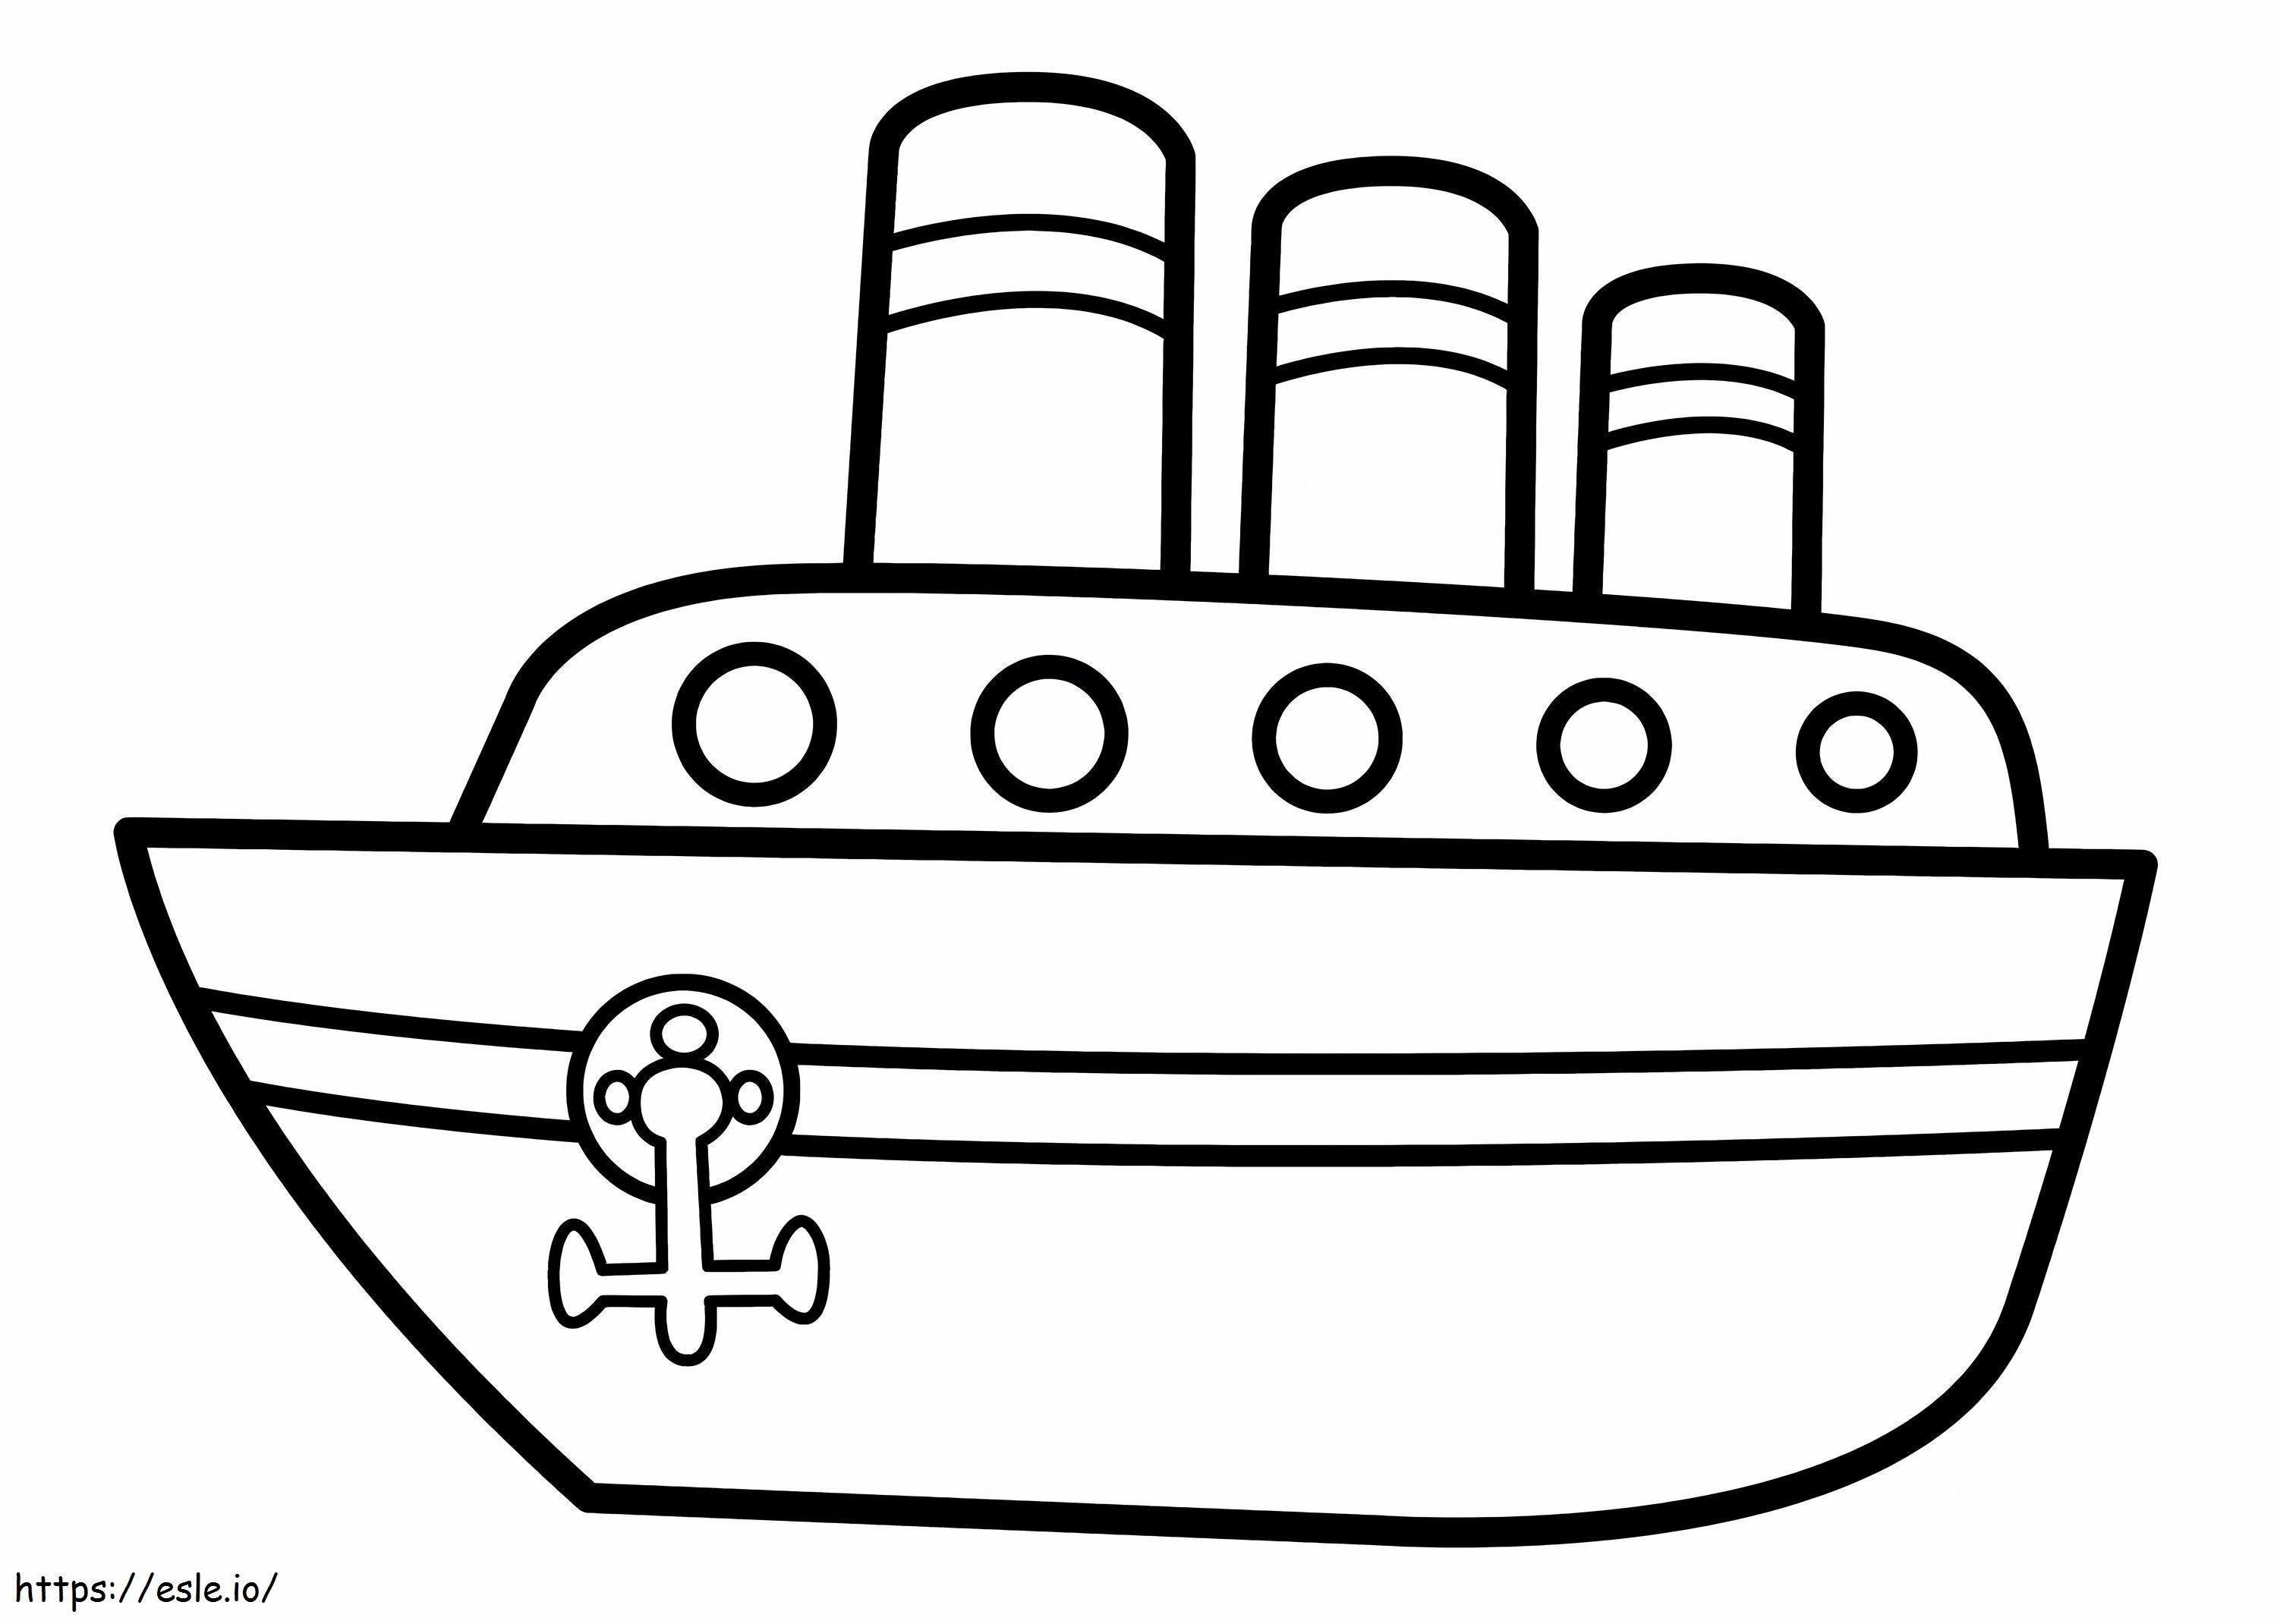 Basic Boat coloring page